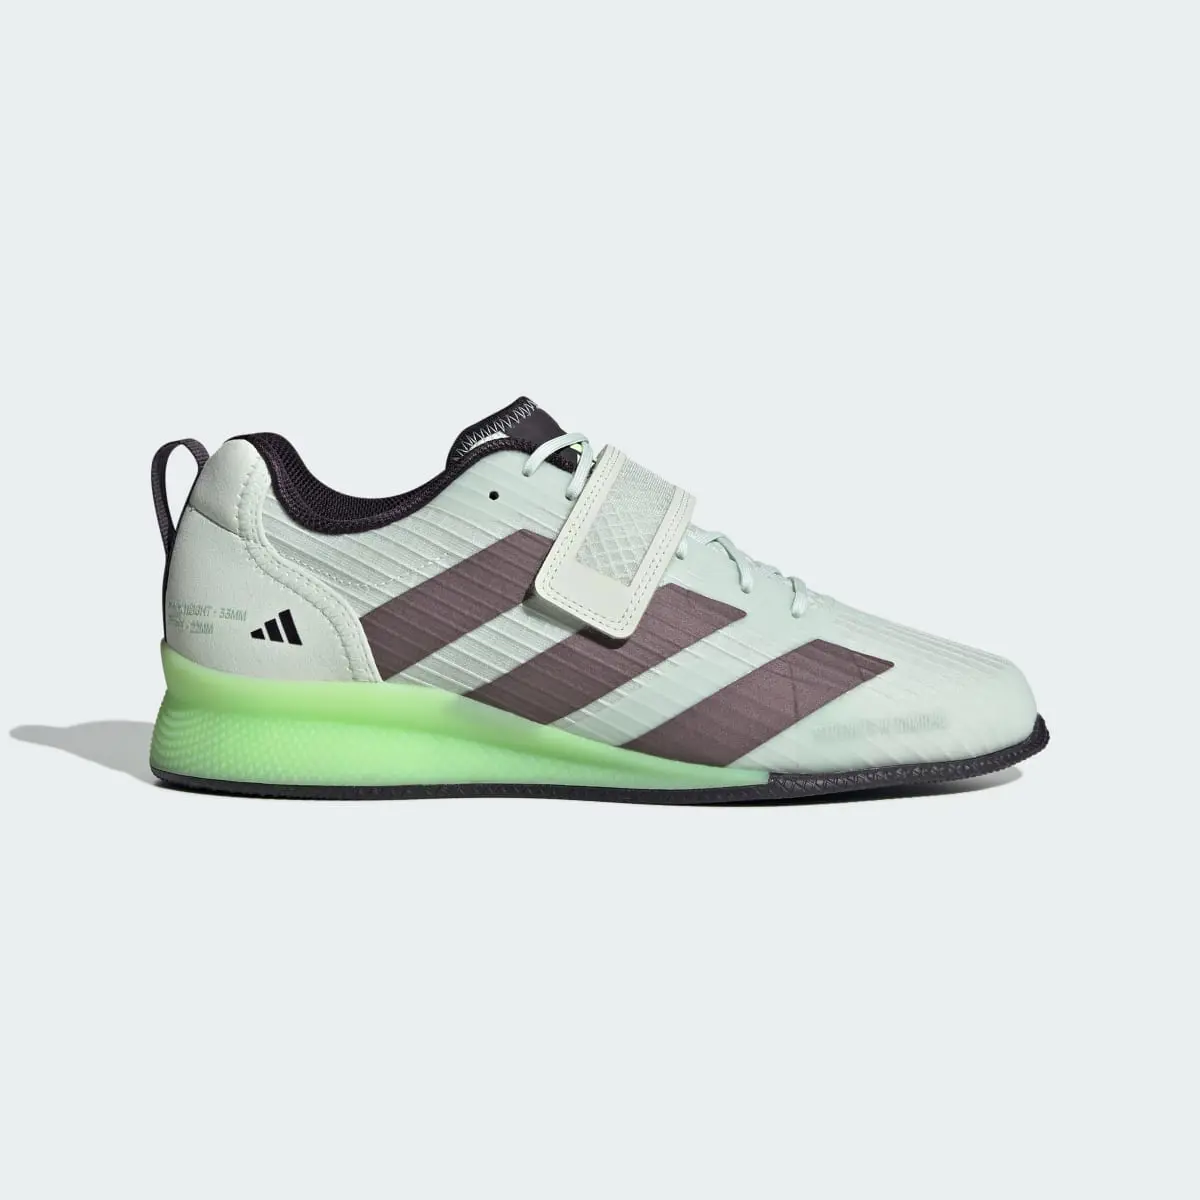 Adidas Adipower Weightlifting 3 Shoes. 2